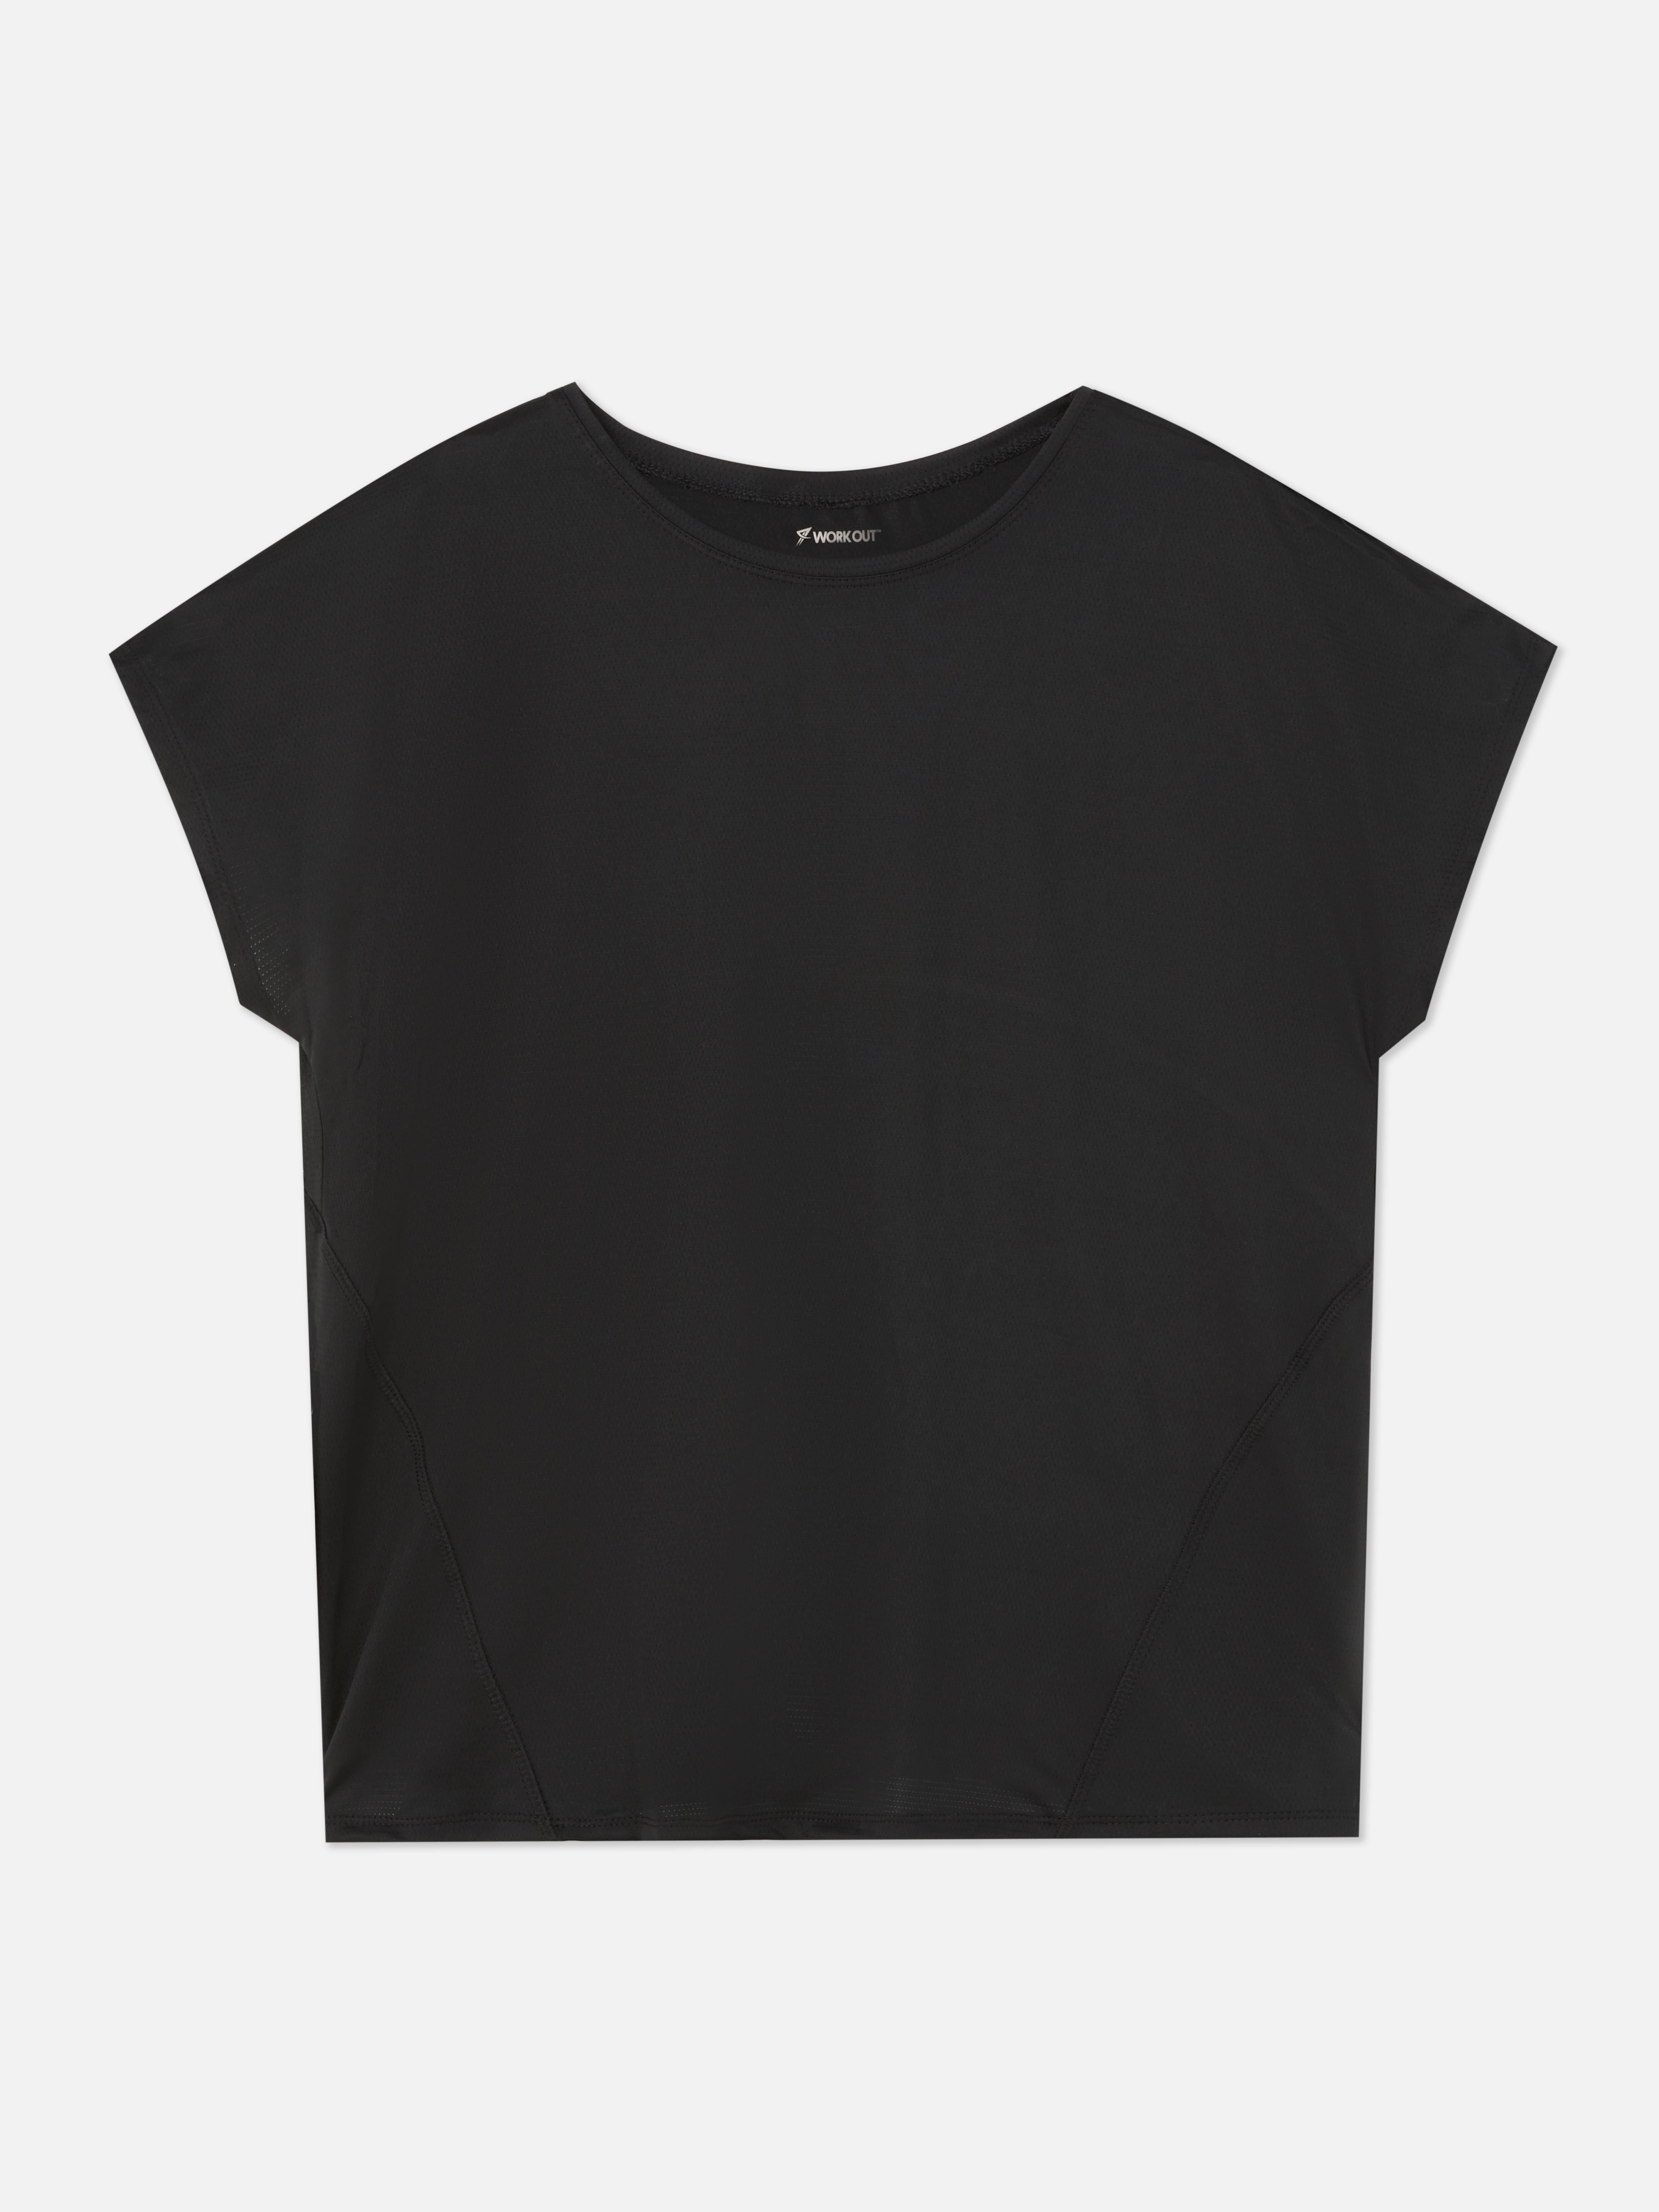 Perforated Performance T-shirt